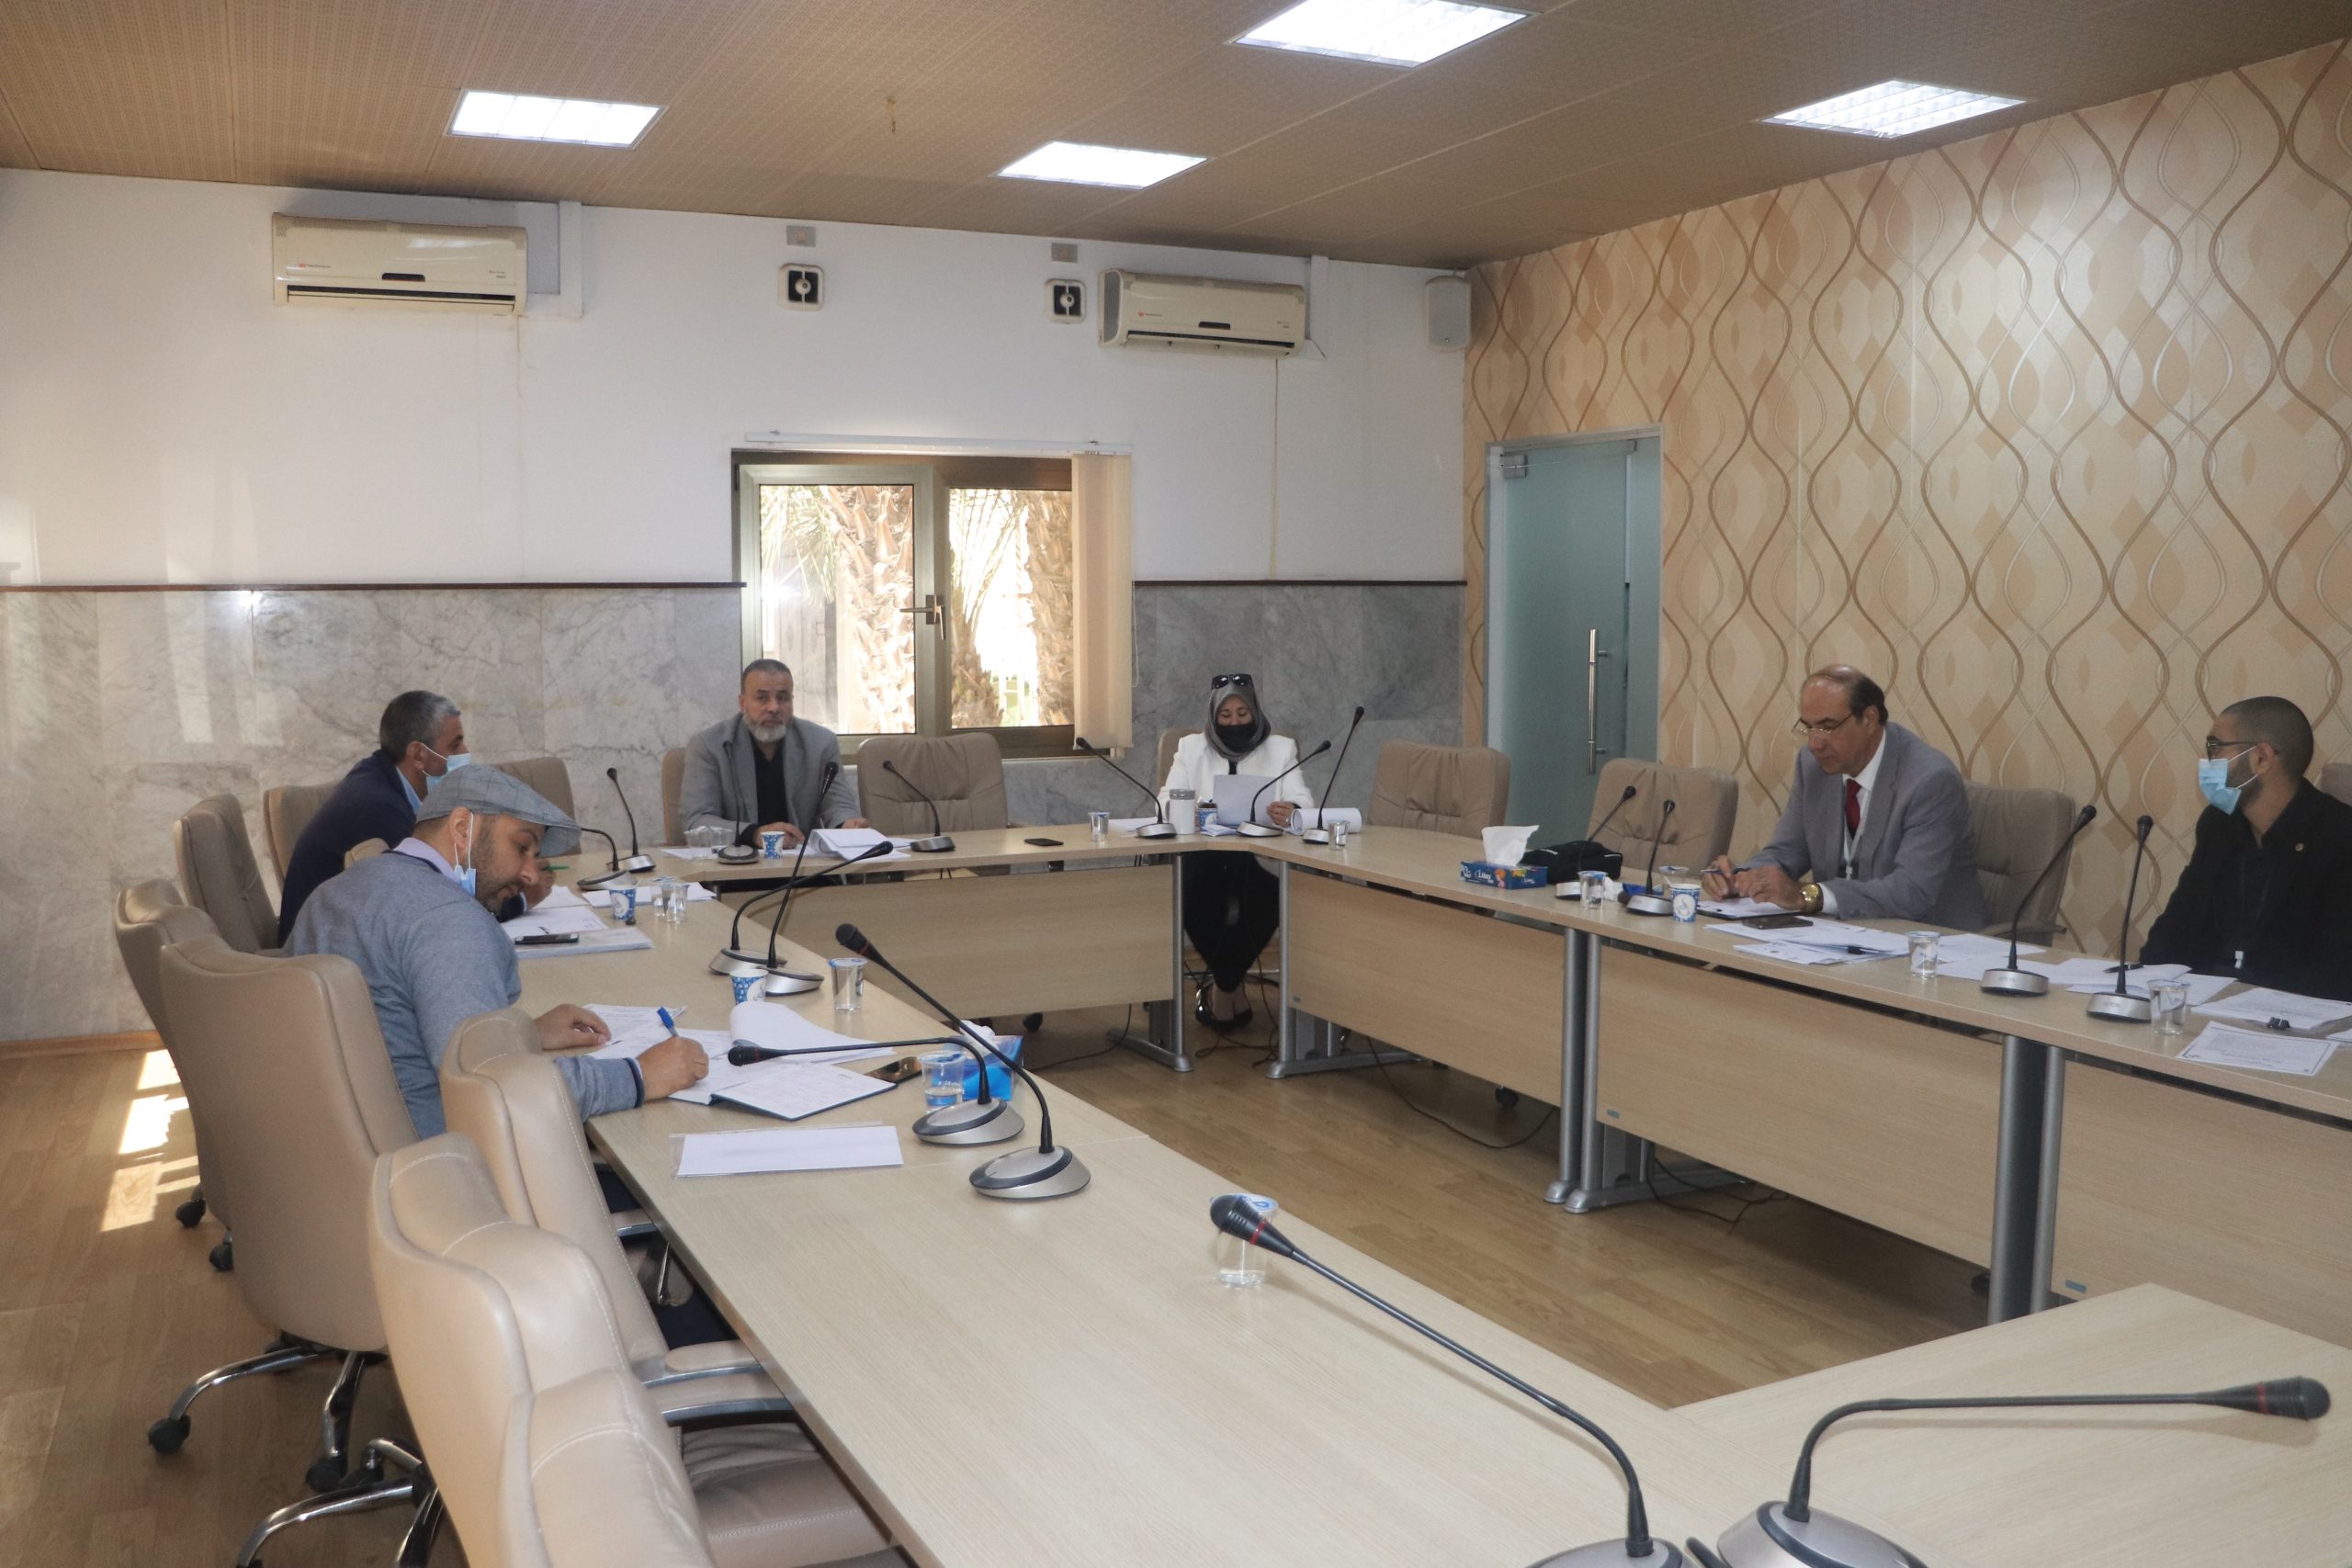 The meeting of the management committee of the oil clinic